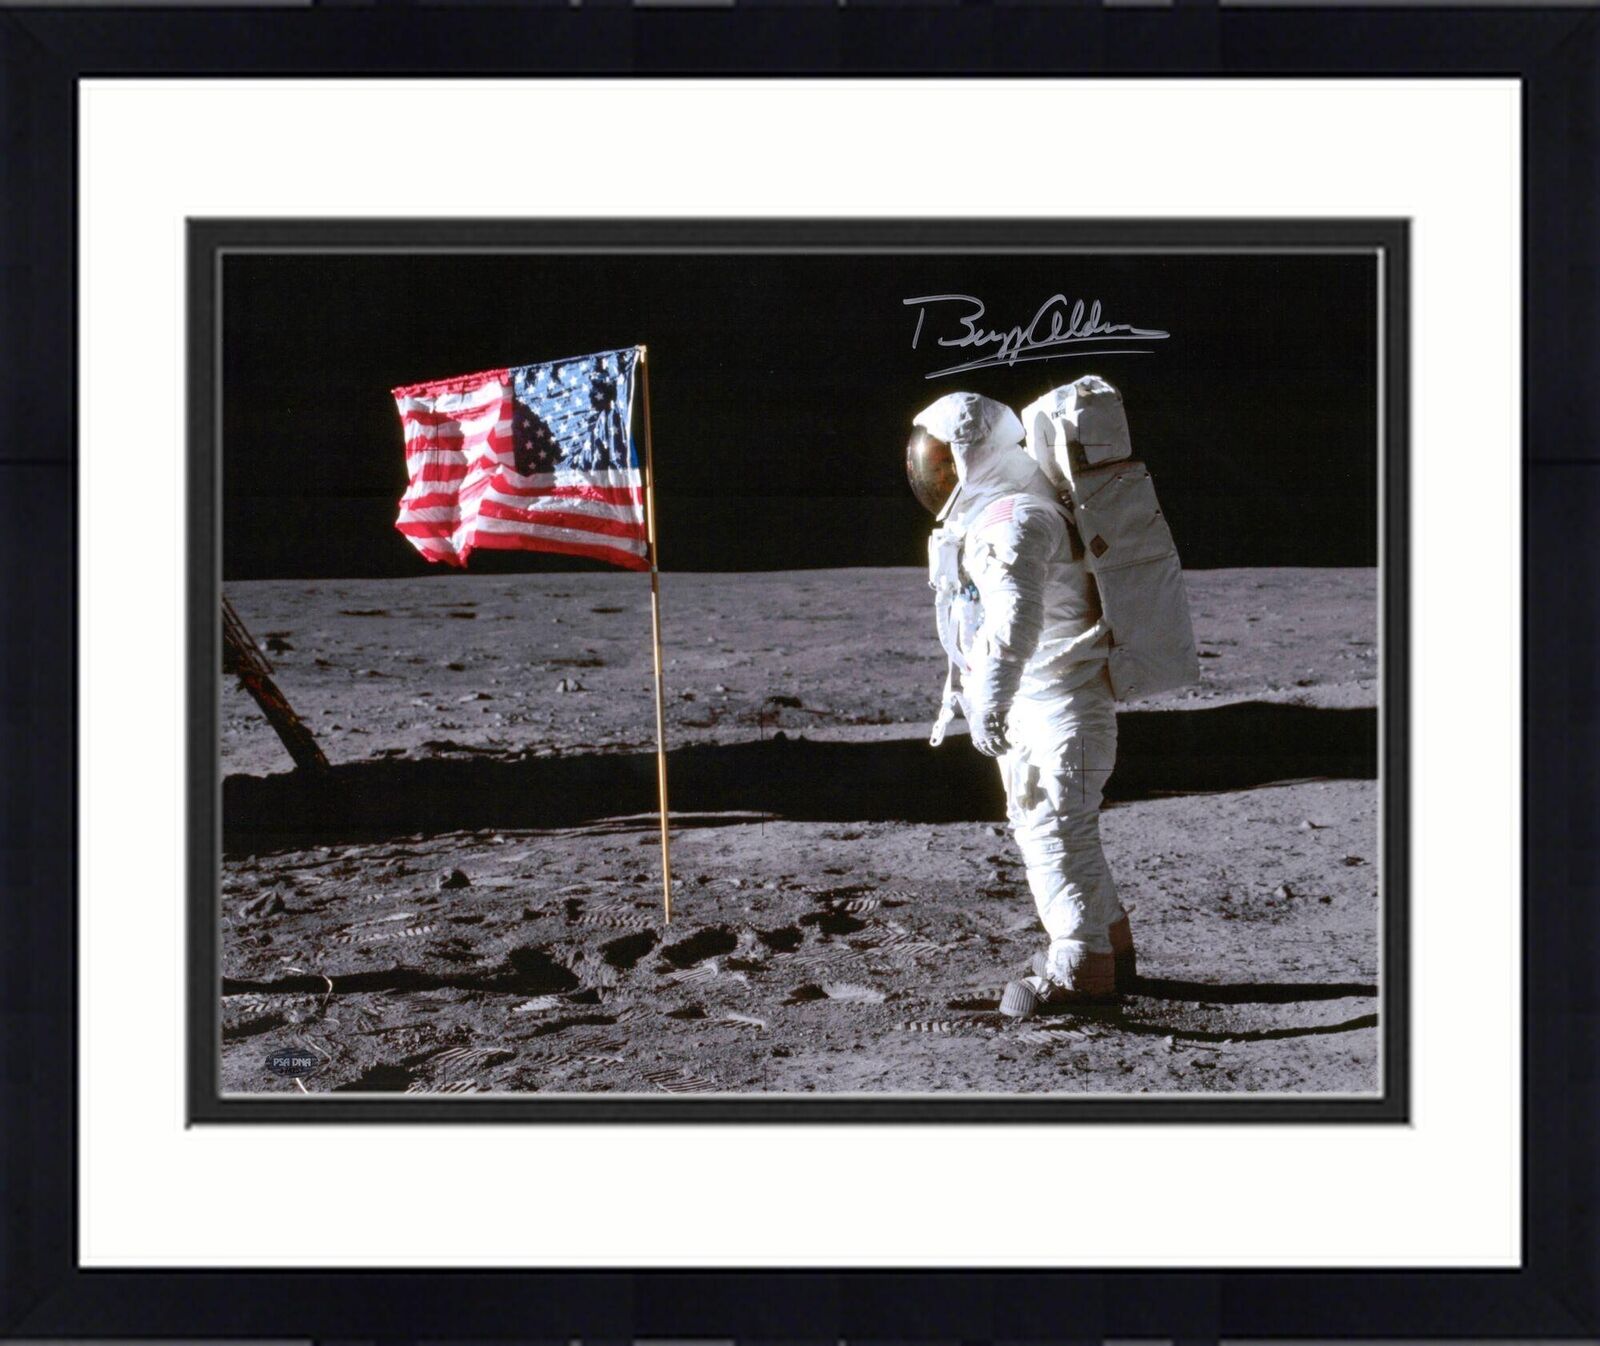 Framed Buzz Aldrin Autographed 16